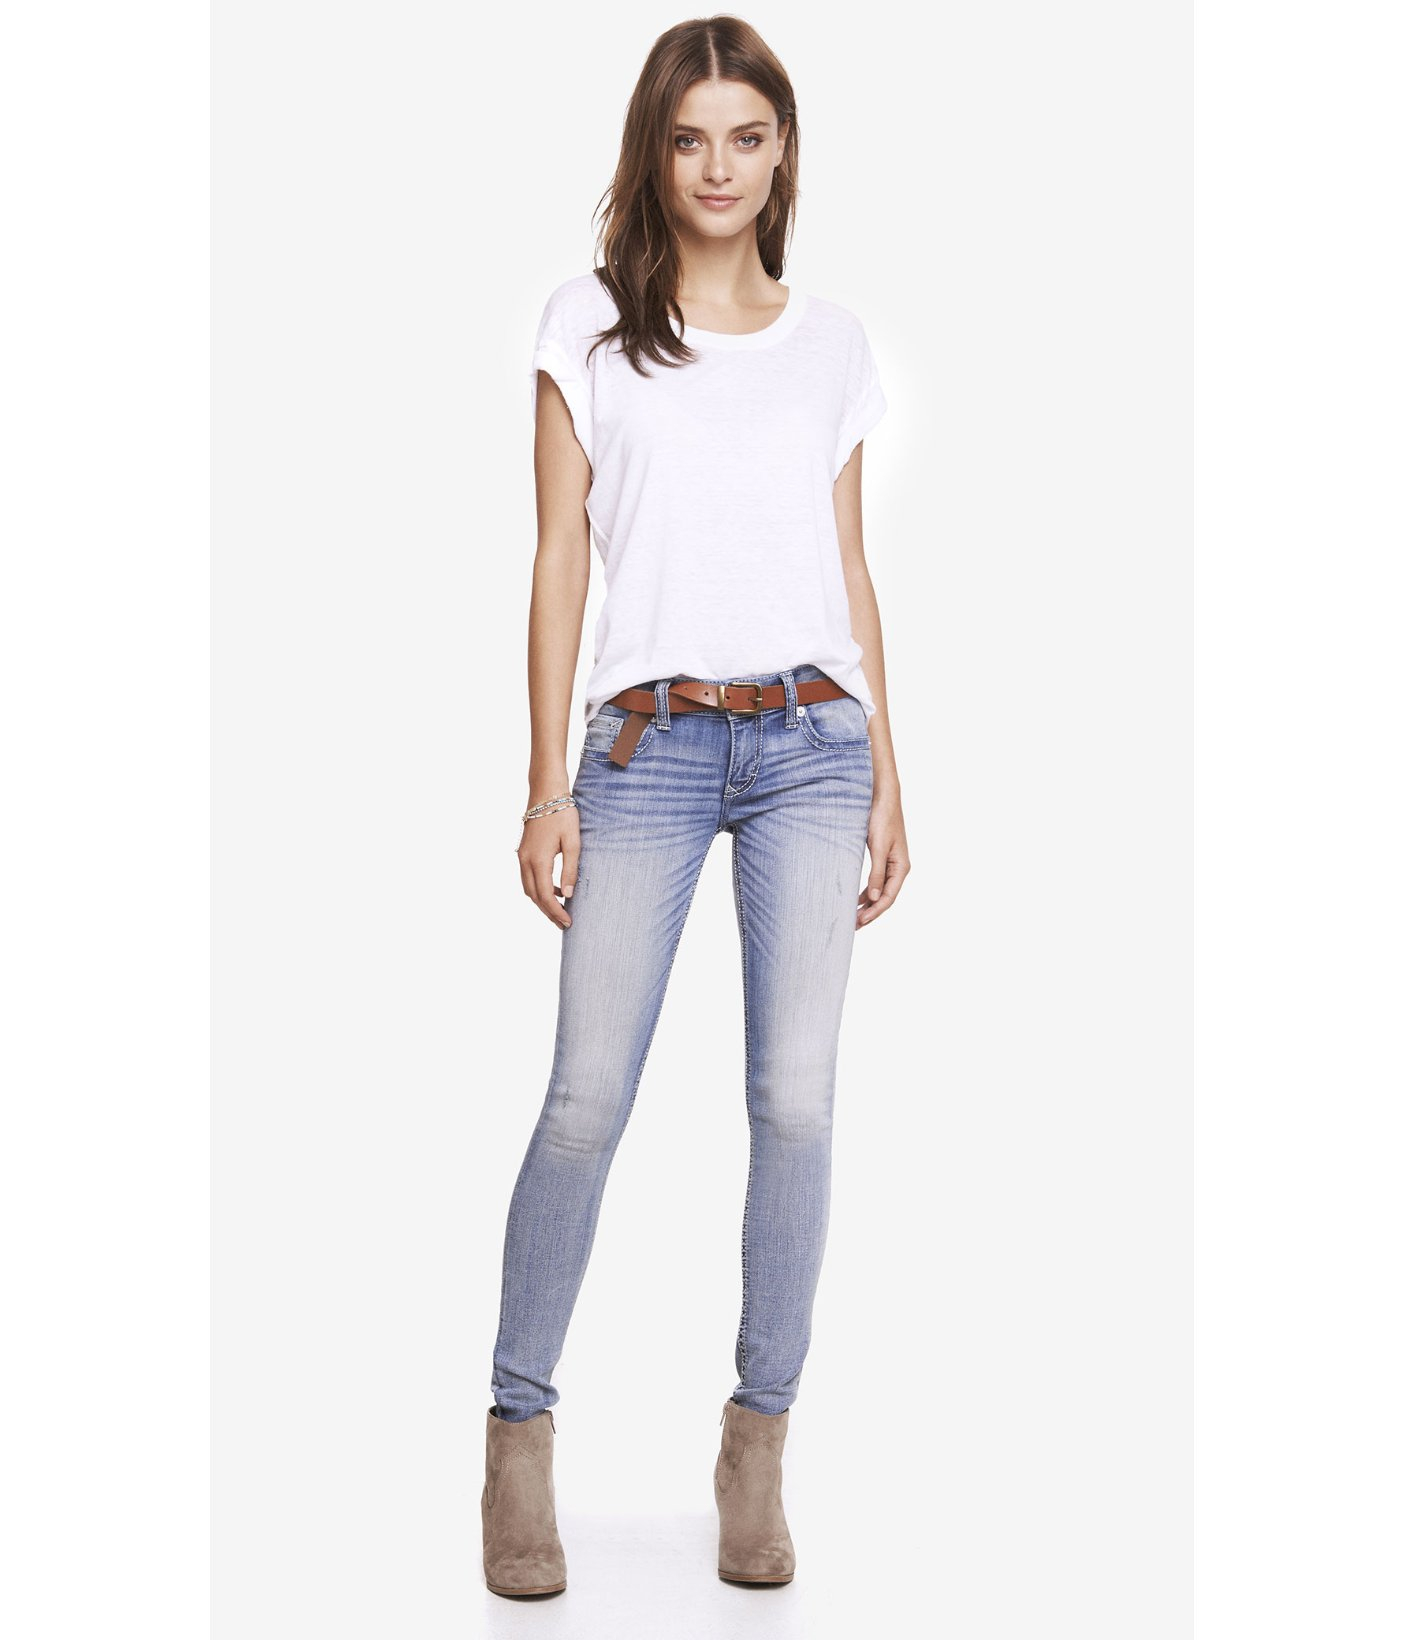 Lyst Express Light Low Rise Thick Stitch Jean Legging In Blue